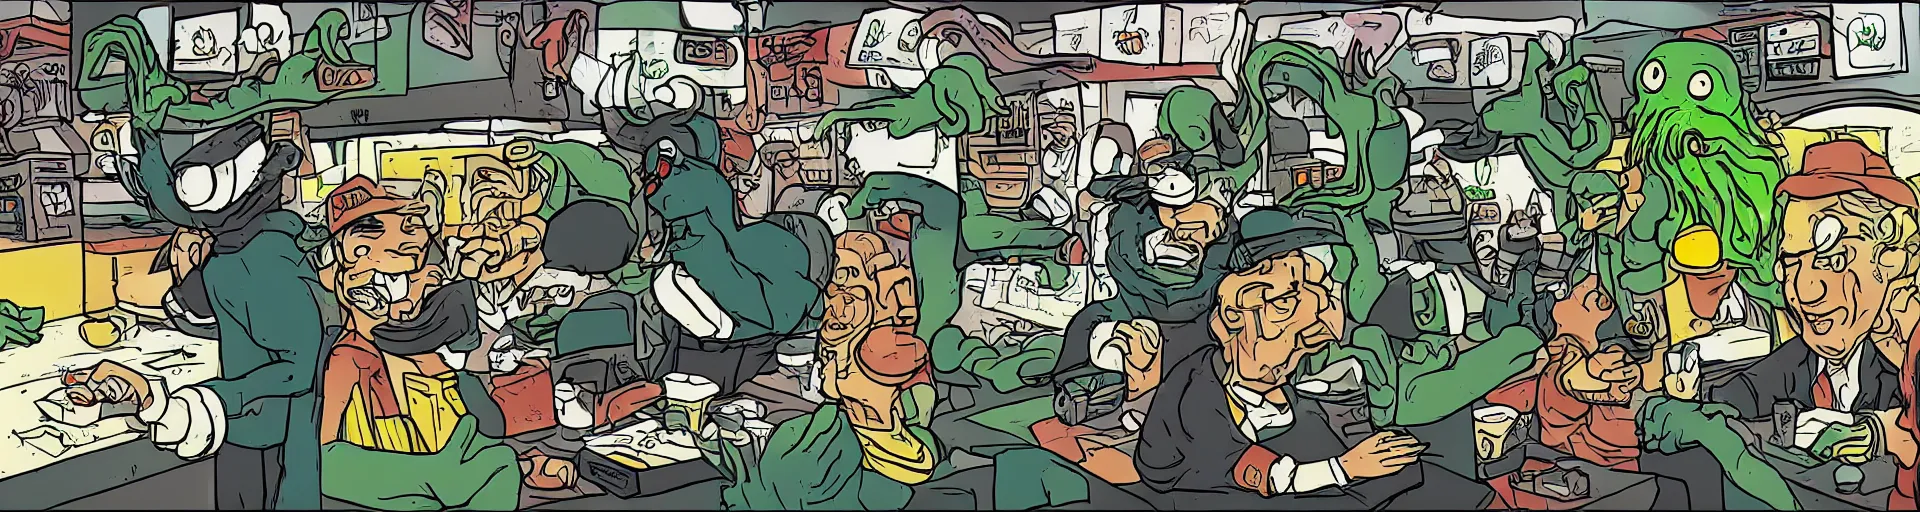 Image similar to Cthulhu working at McDonalds because he lost all of his money leverage trading bitcoin, mike judge art style, 90s mtv illustration